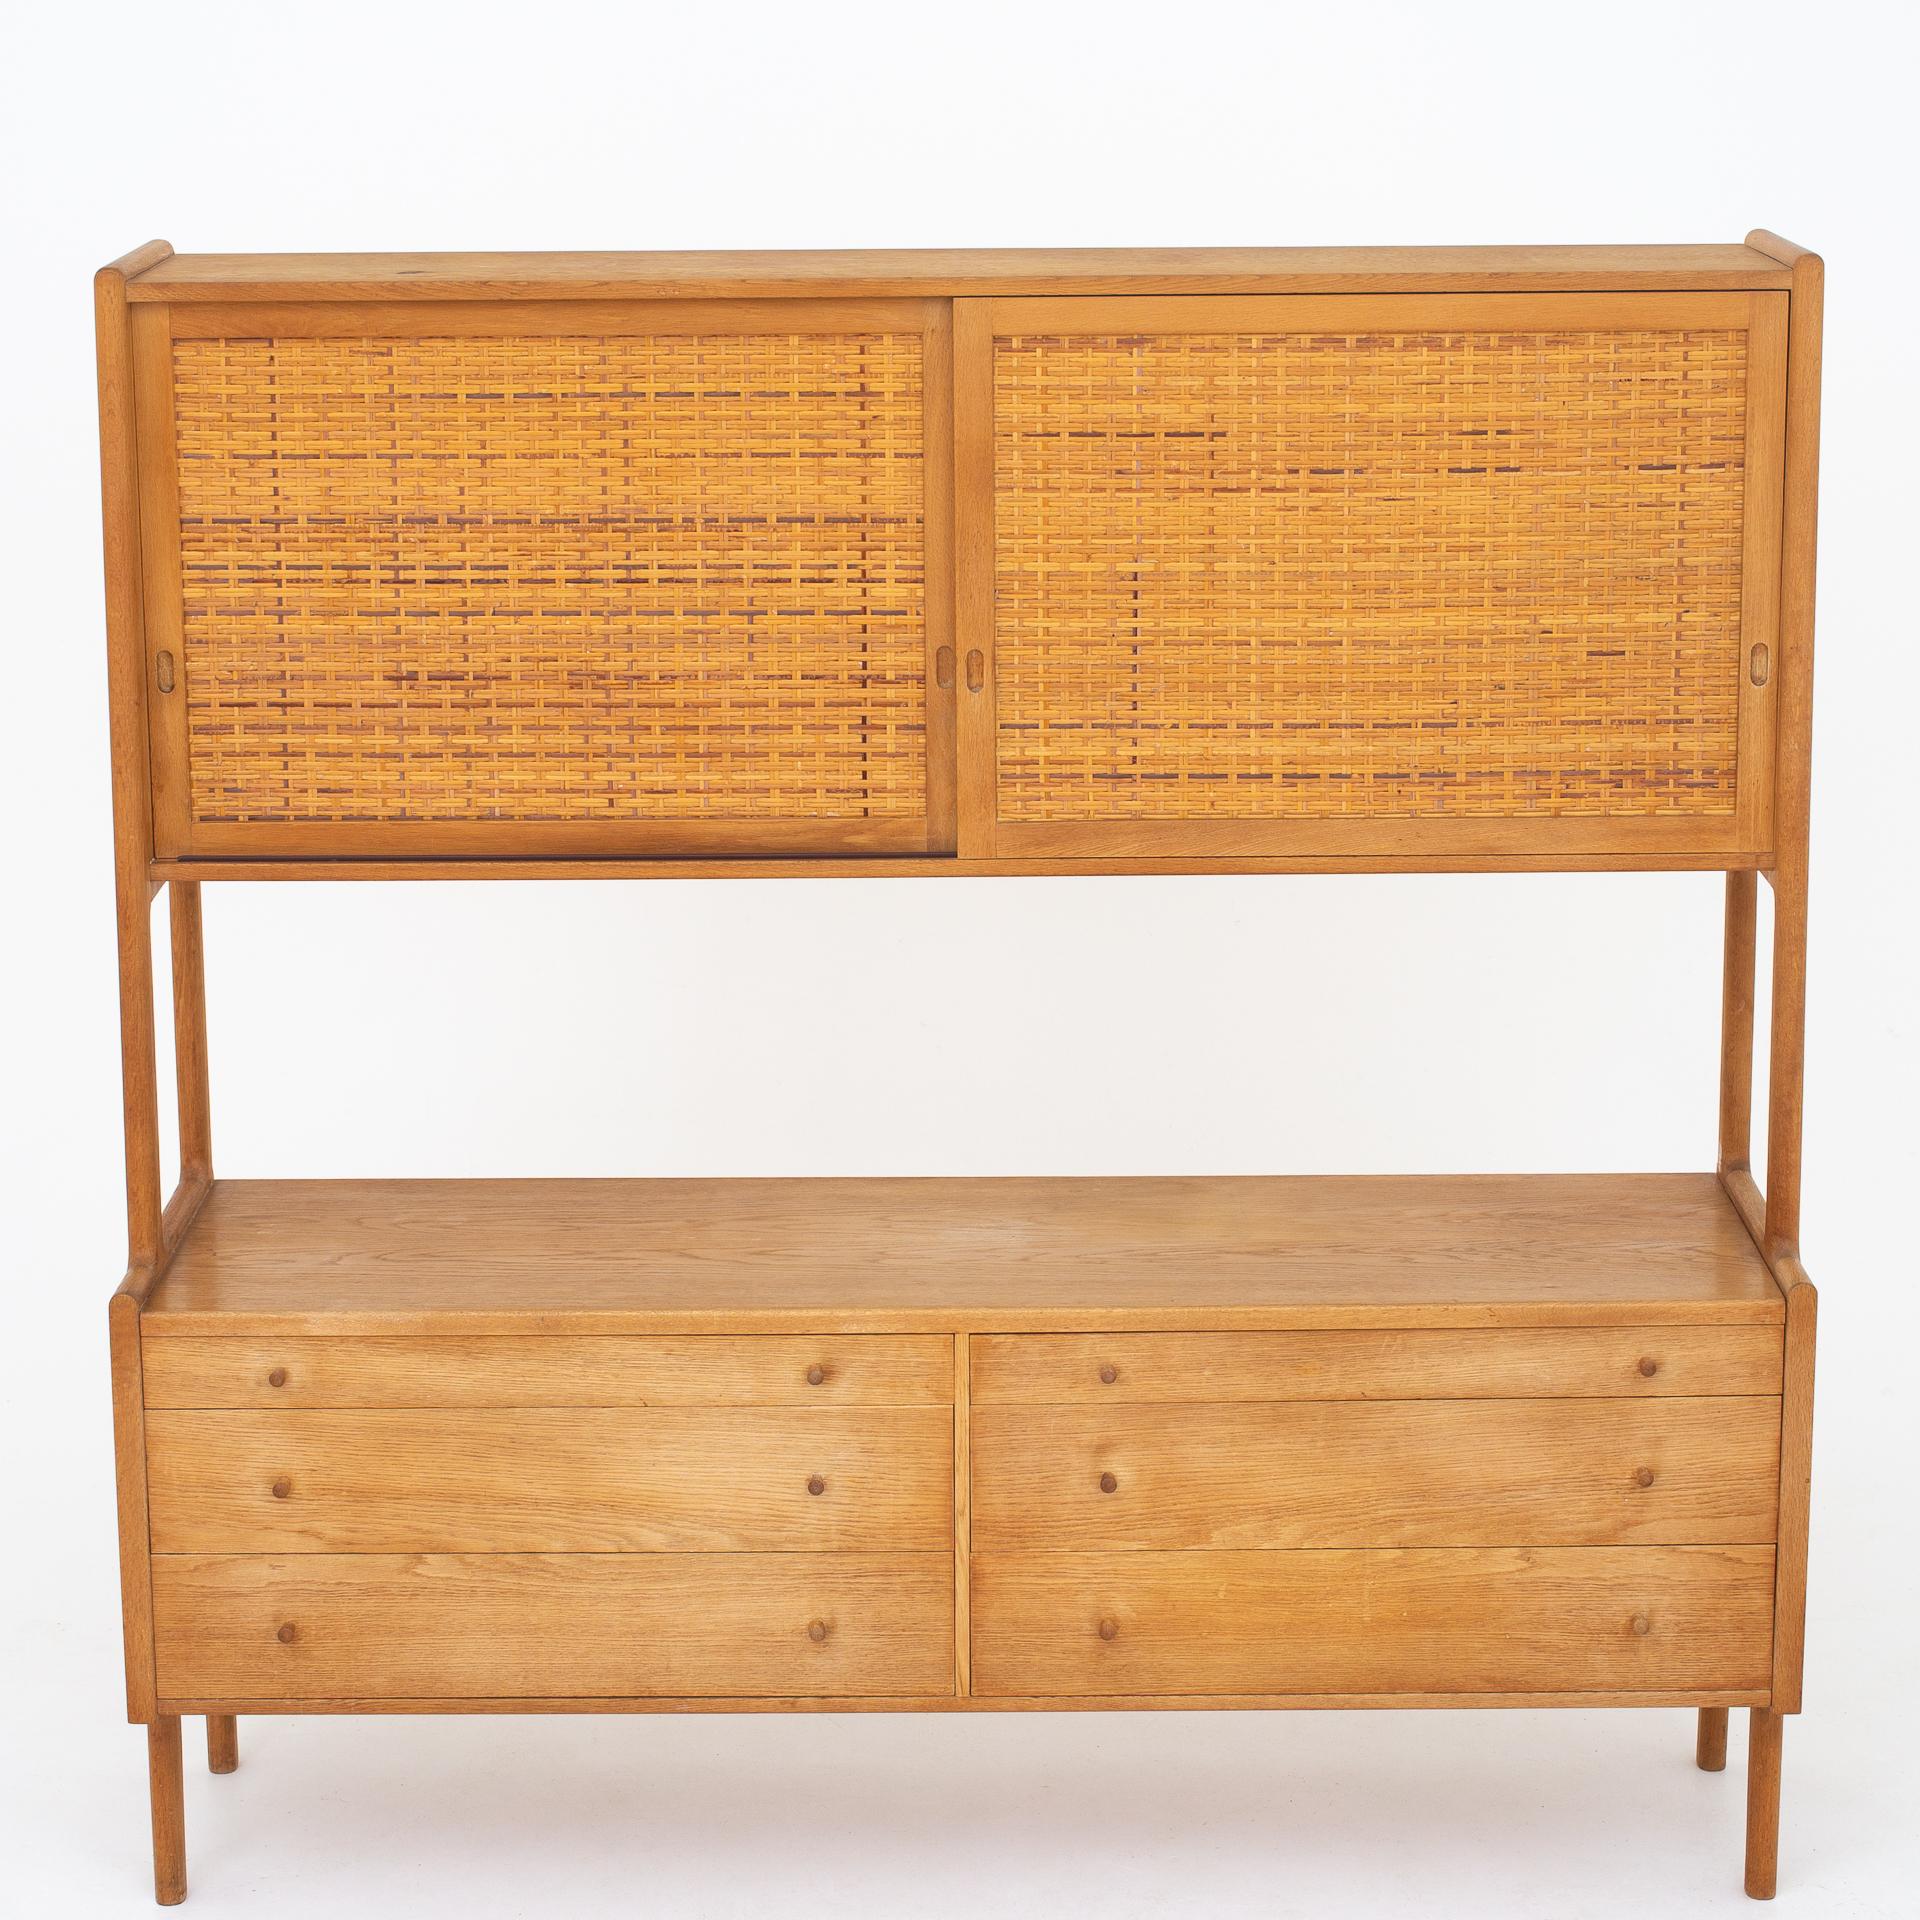 Tall sideboard by Hans J. Wegner For Sale at 1stdibs